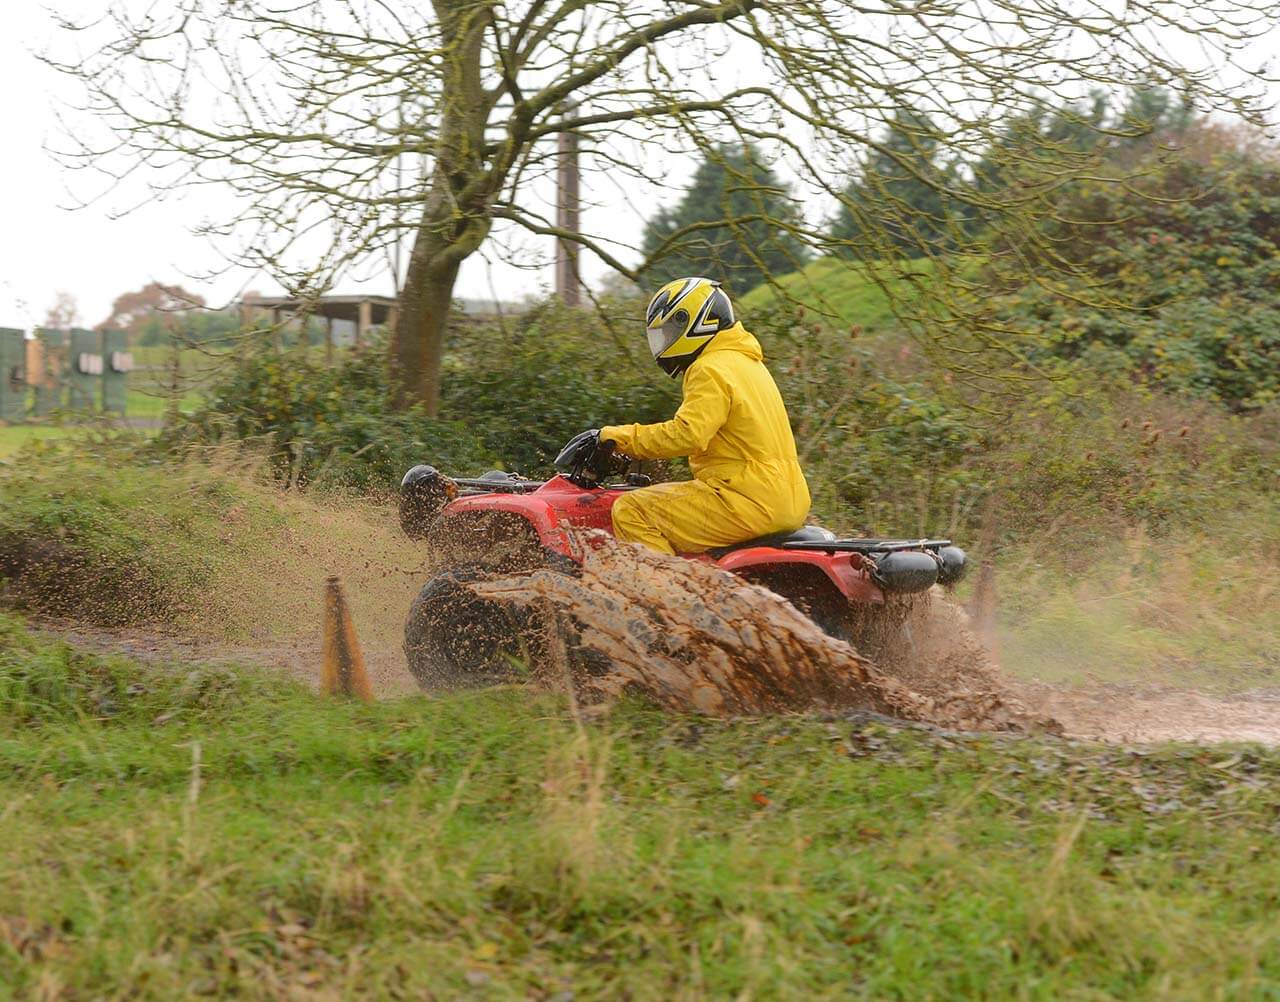 A quad bike being driven through a muddy puddle